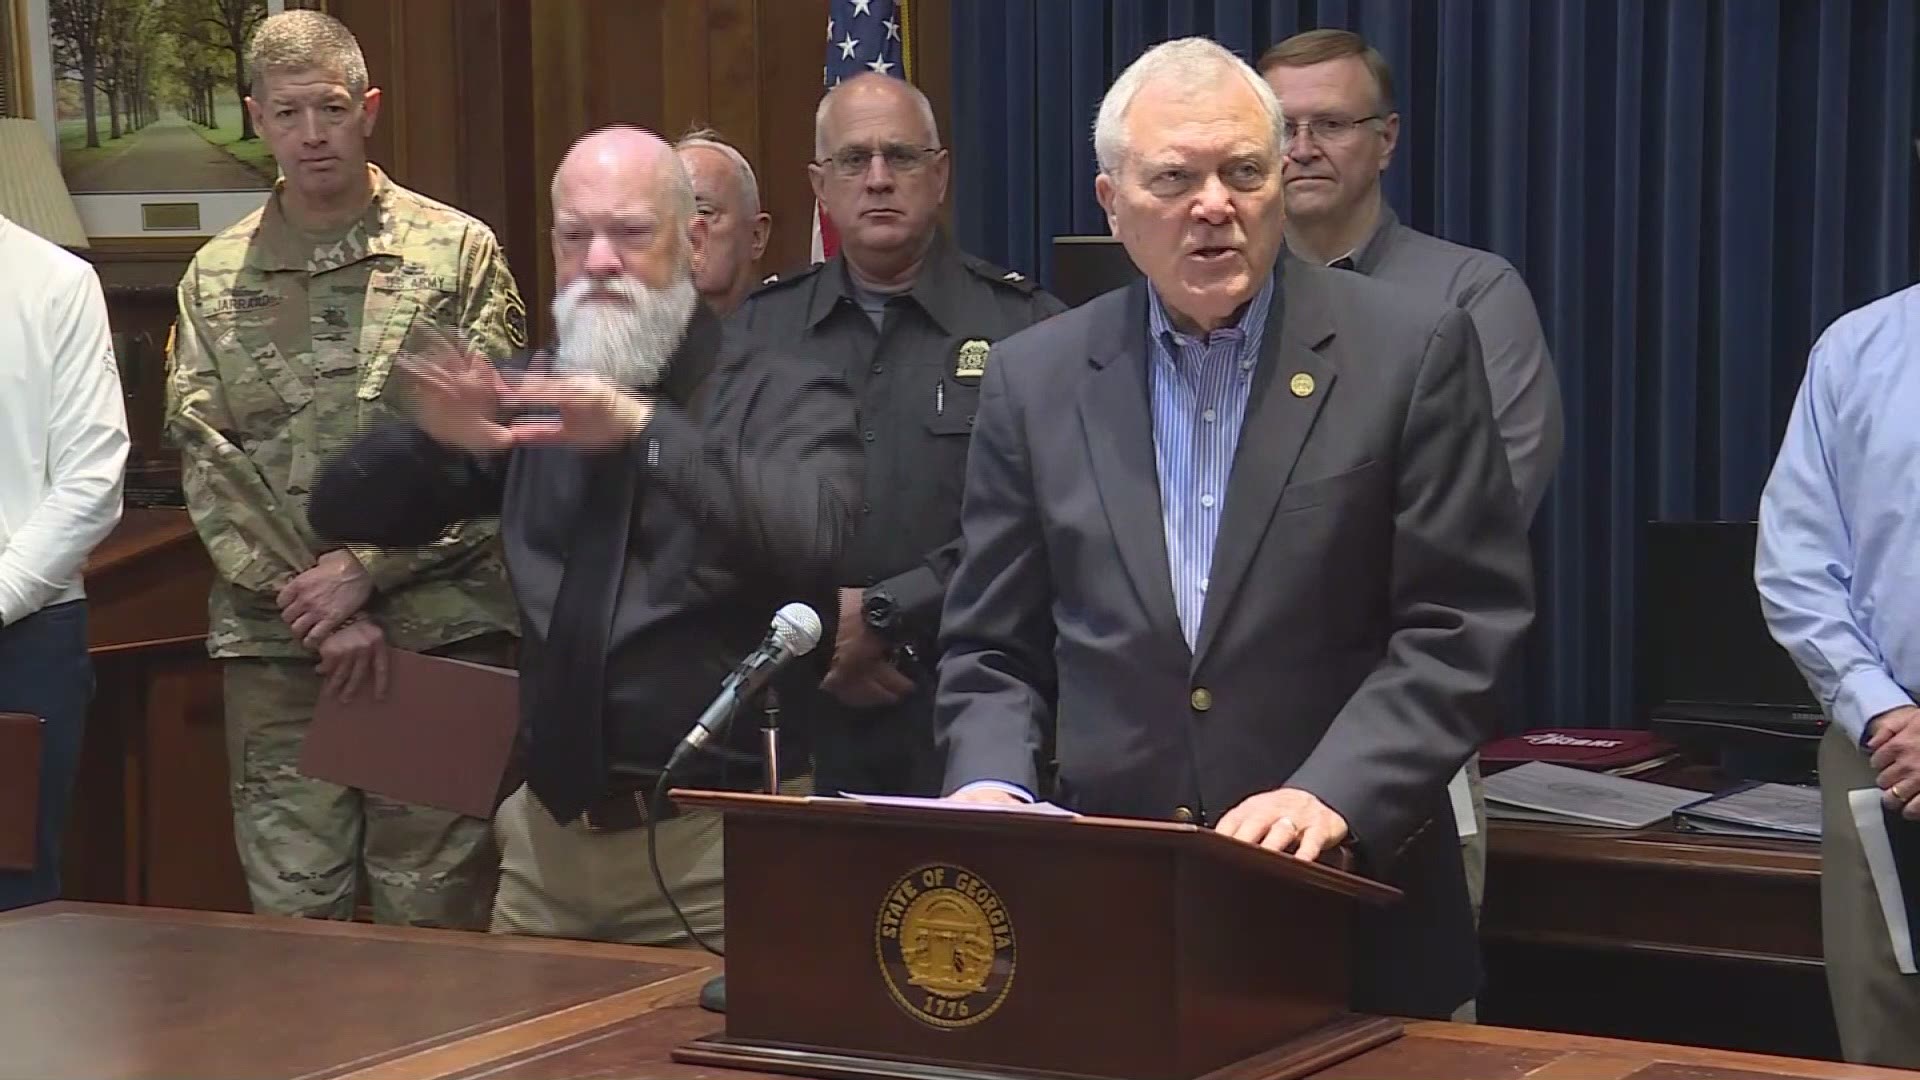 Georgia Gov. Nathan Deal gave an update on the condition of the state after a hurricane/tropical storm passed through here Monday. More than a million people are still without power as crews continue clearing roads and inspecting bridges.